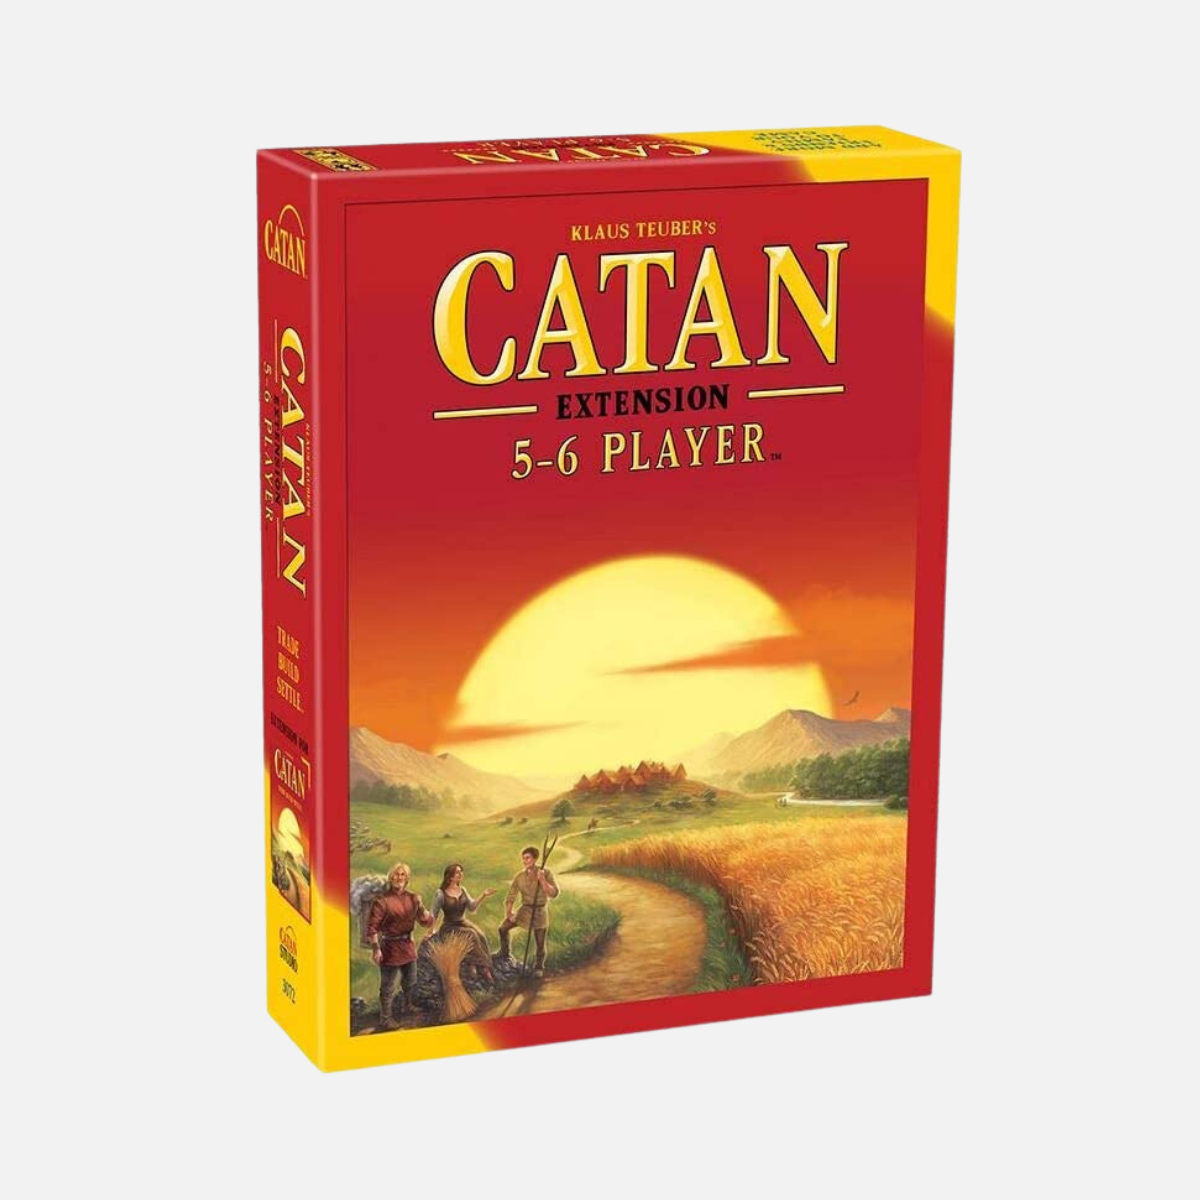 Catan 5-6 Player extension